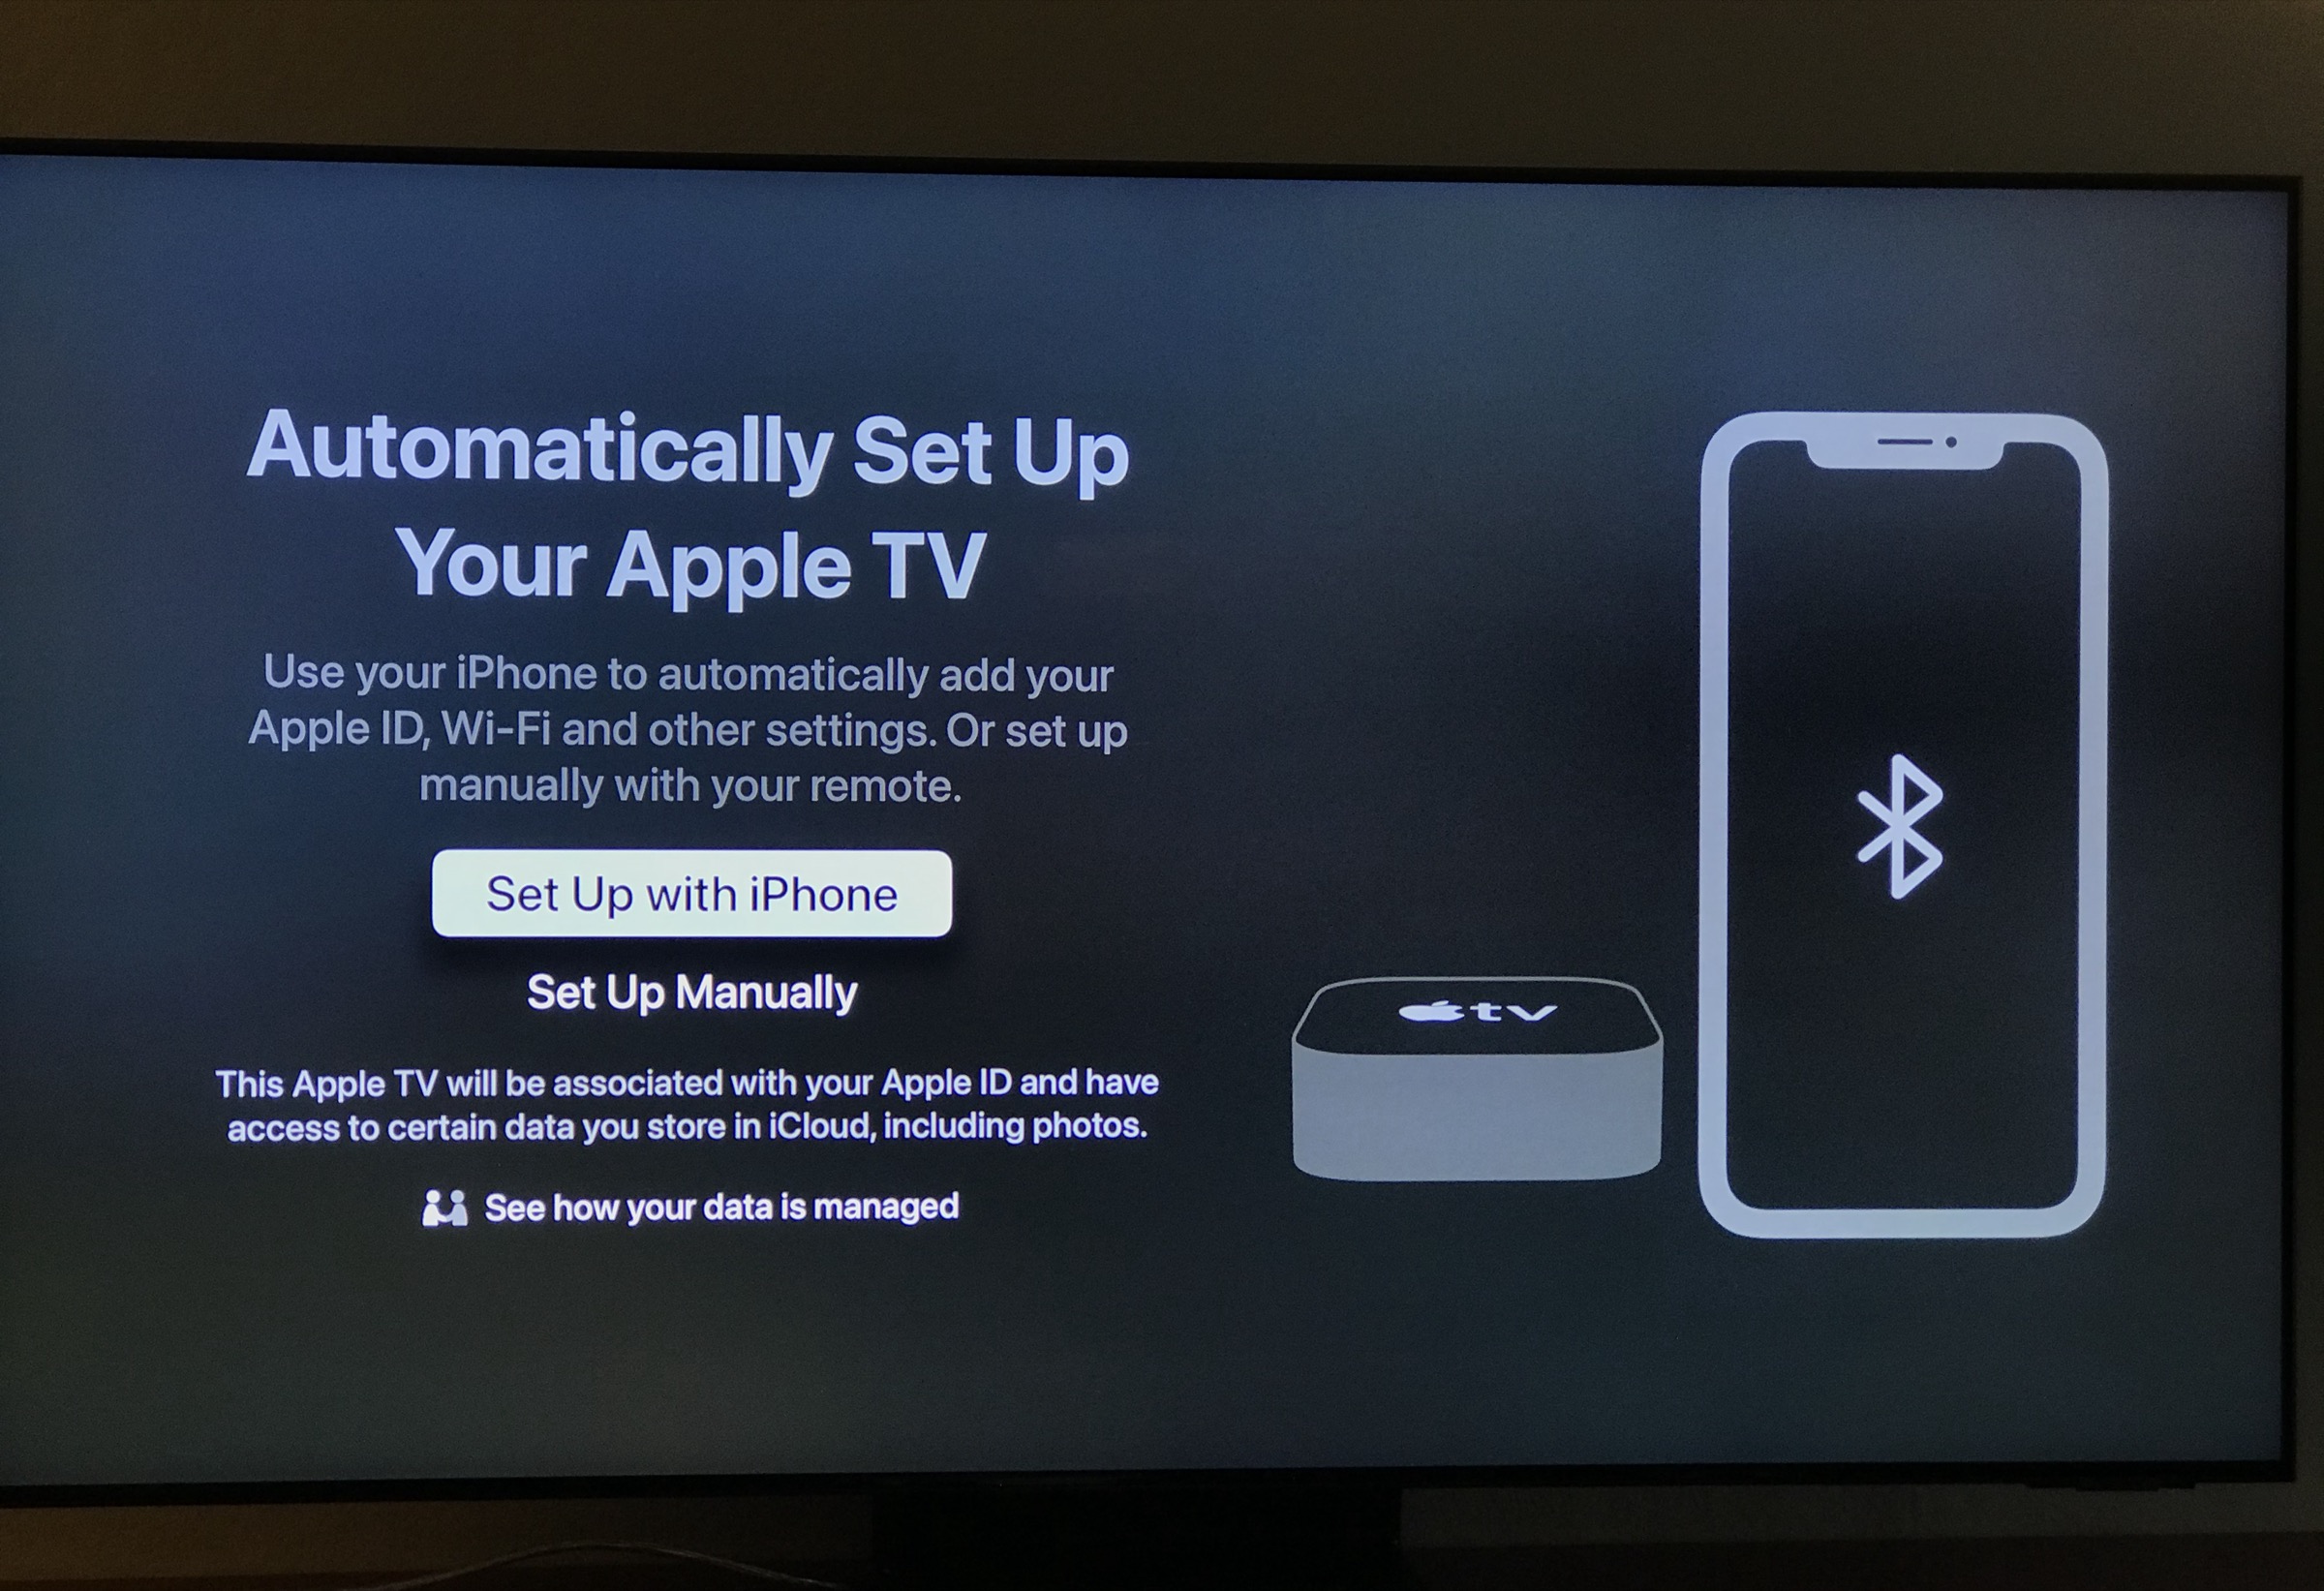 Apple TV HD - Technical Specifications - Apple (BY)